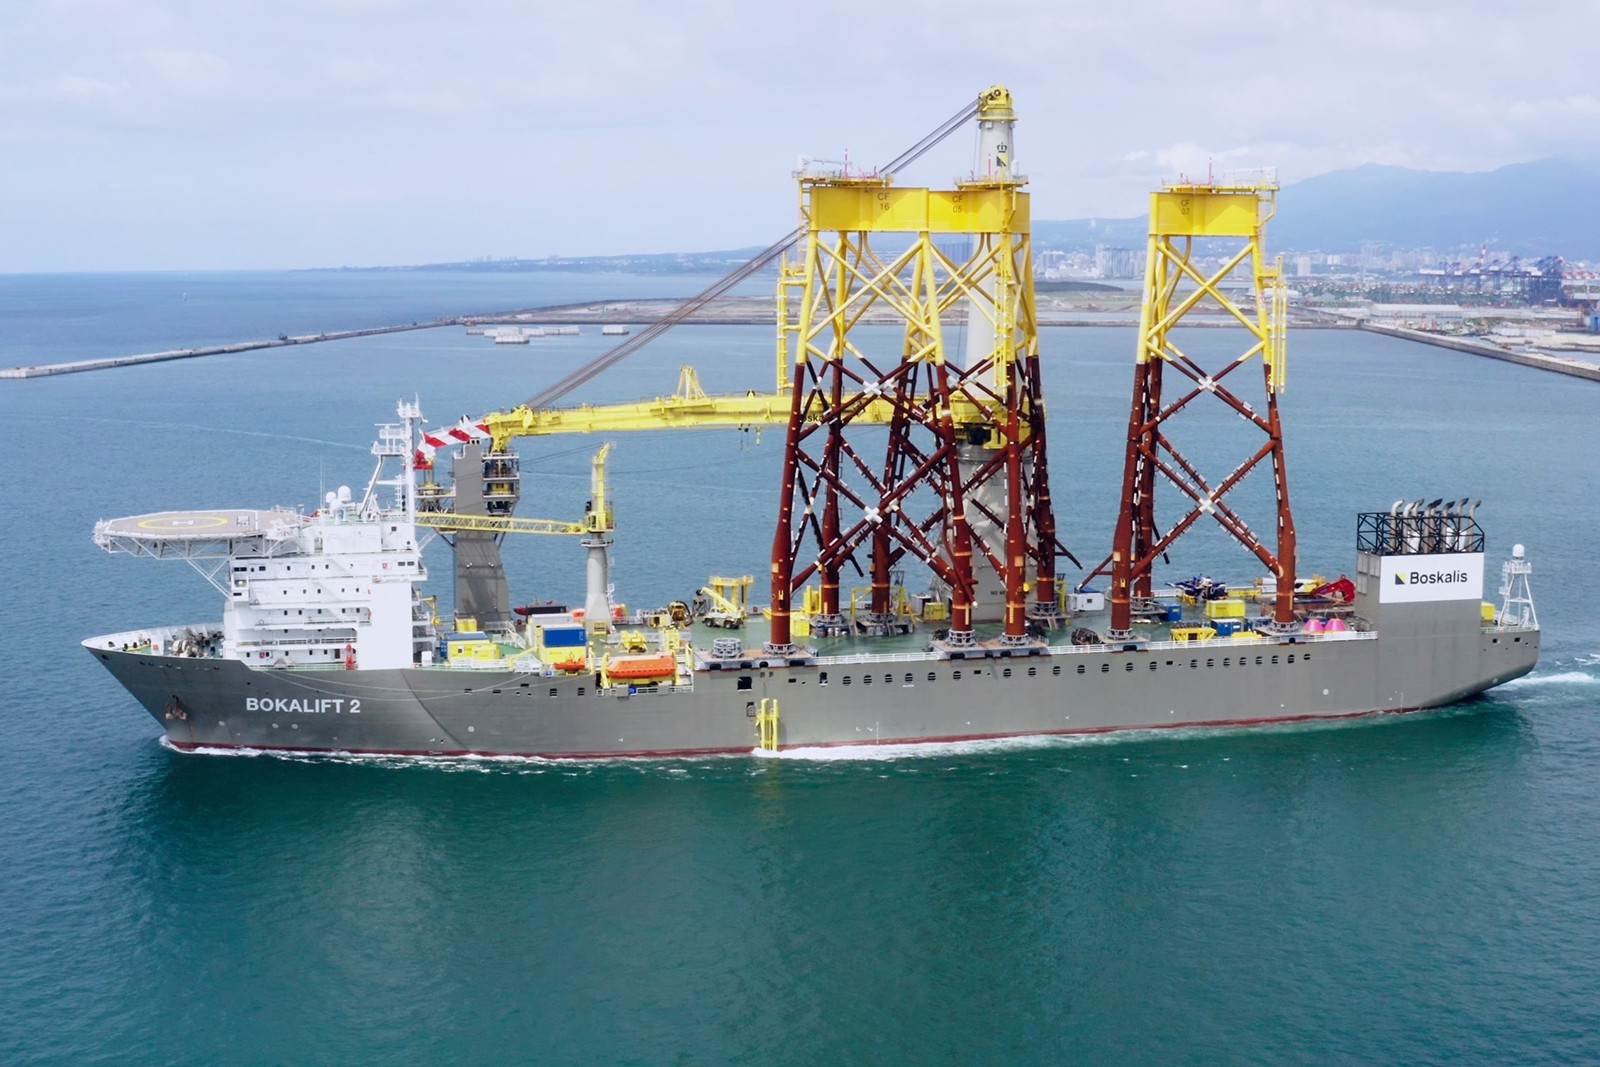 Bokalift 2 loaded with three jackets for the Changfang & Xidao wind farm